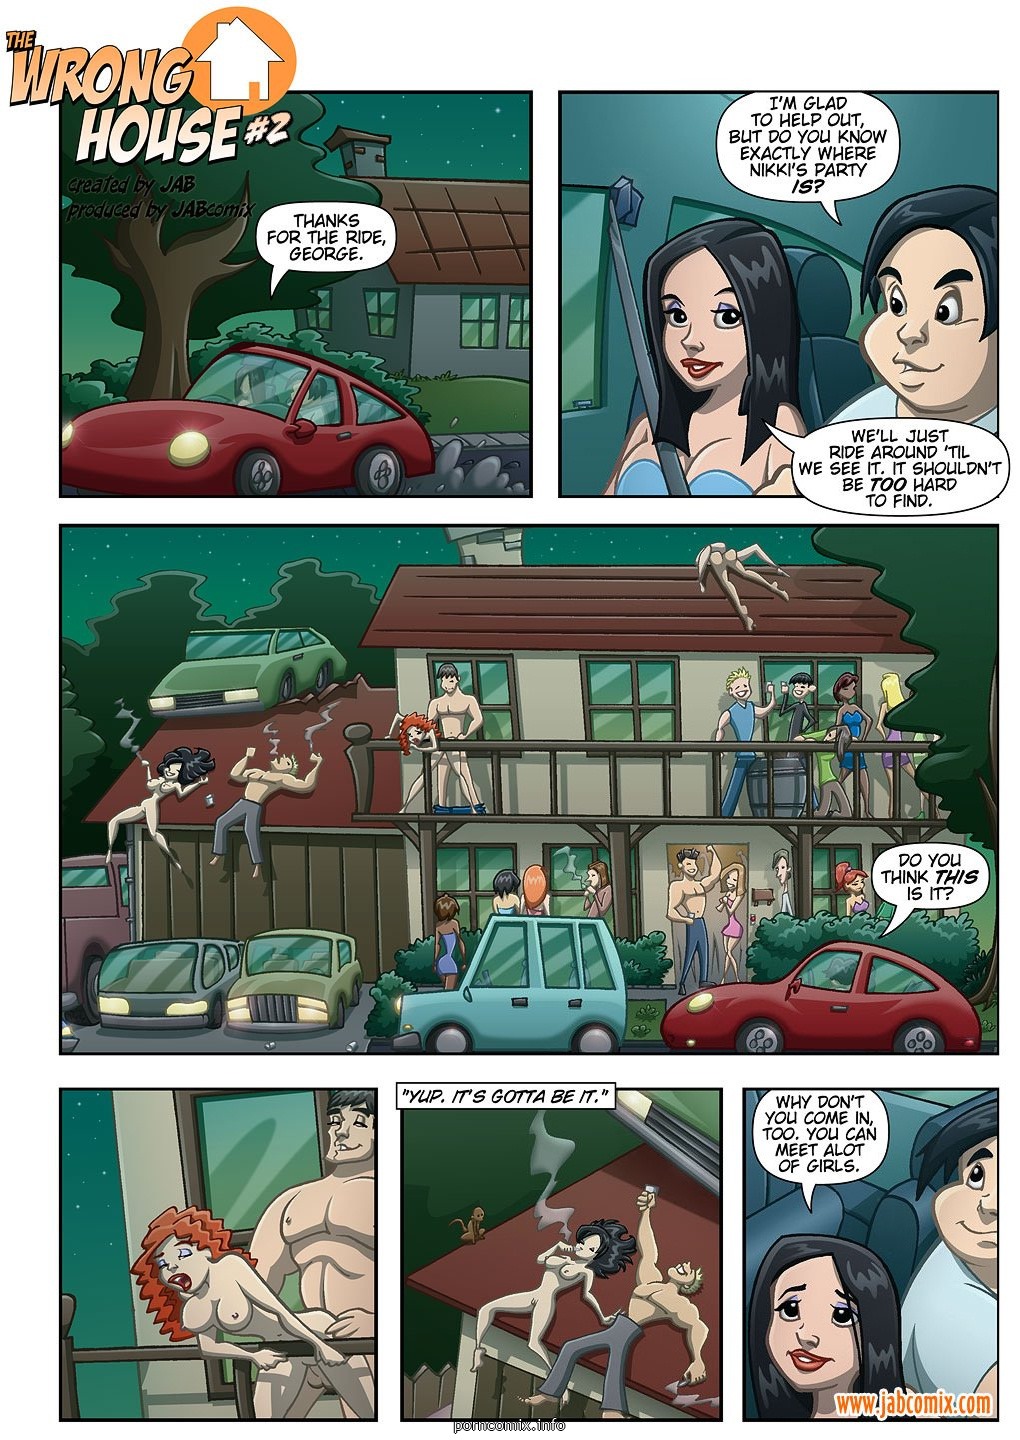 The Wrong House 1 2 ⋆ Xxx Toons Porn 